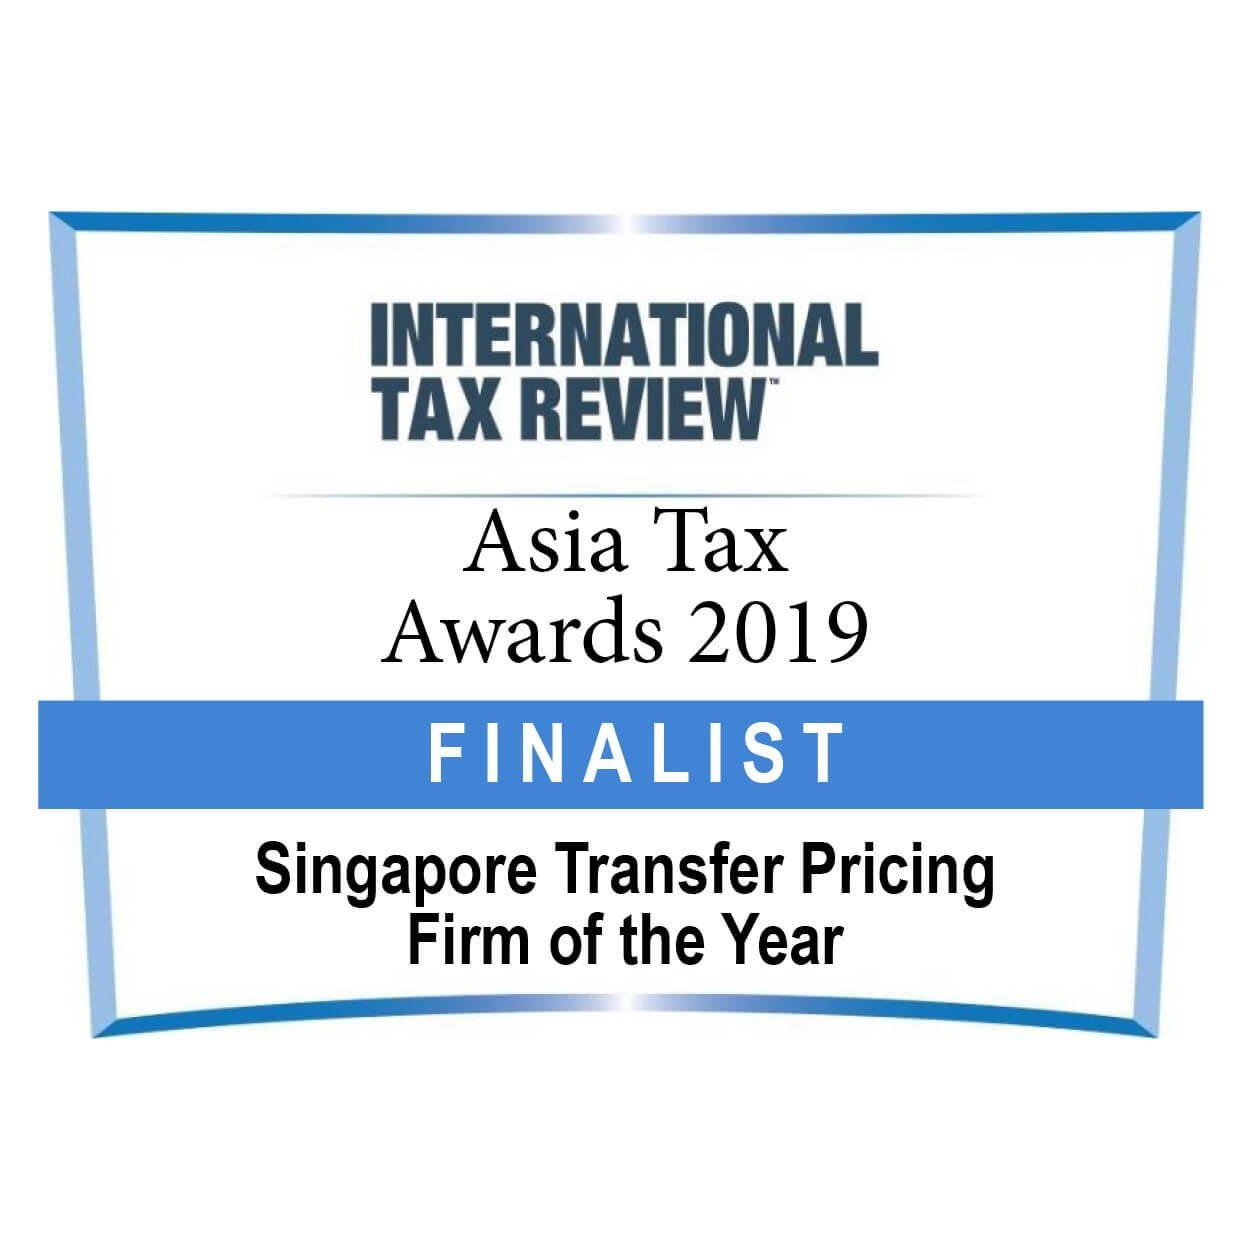 Singapore TP Firm - 2019